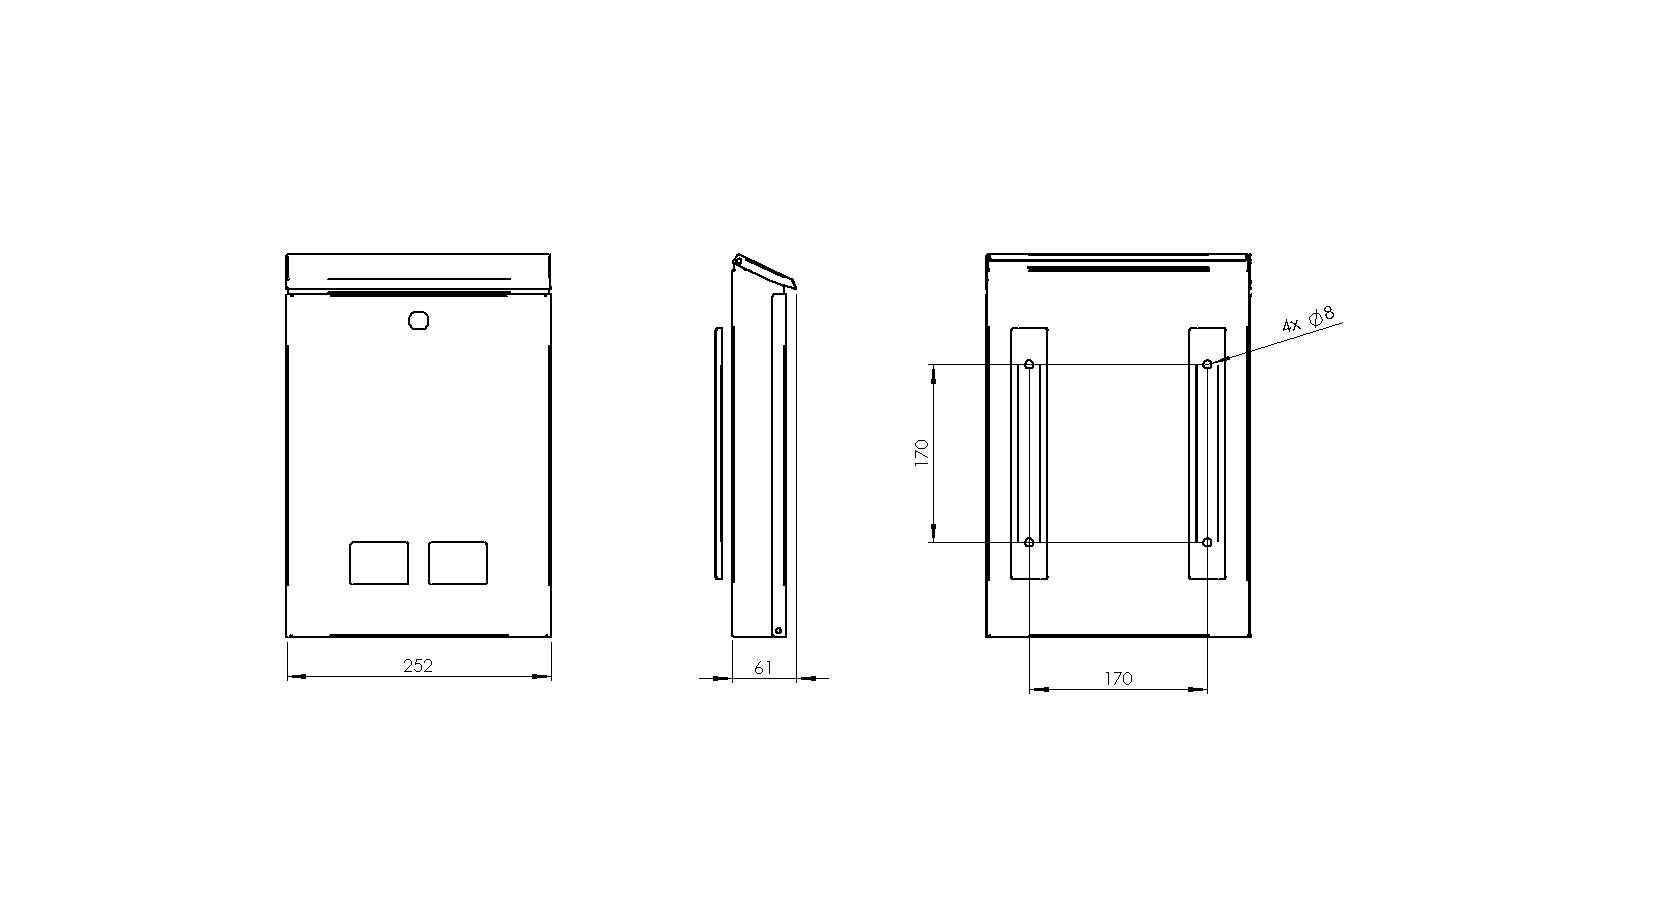 TECHNICAL DRAWING - MAILBOX-AW-V2-21